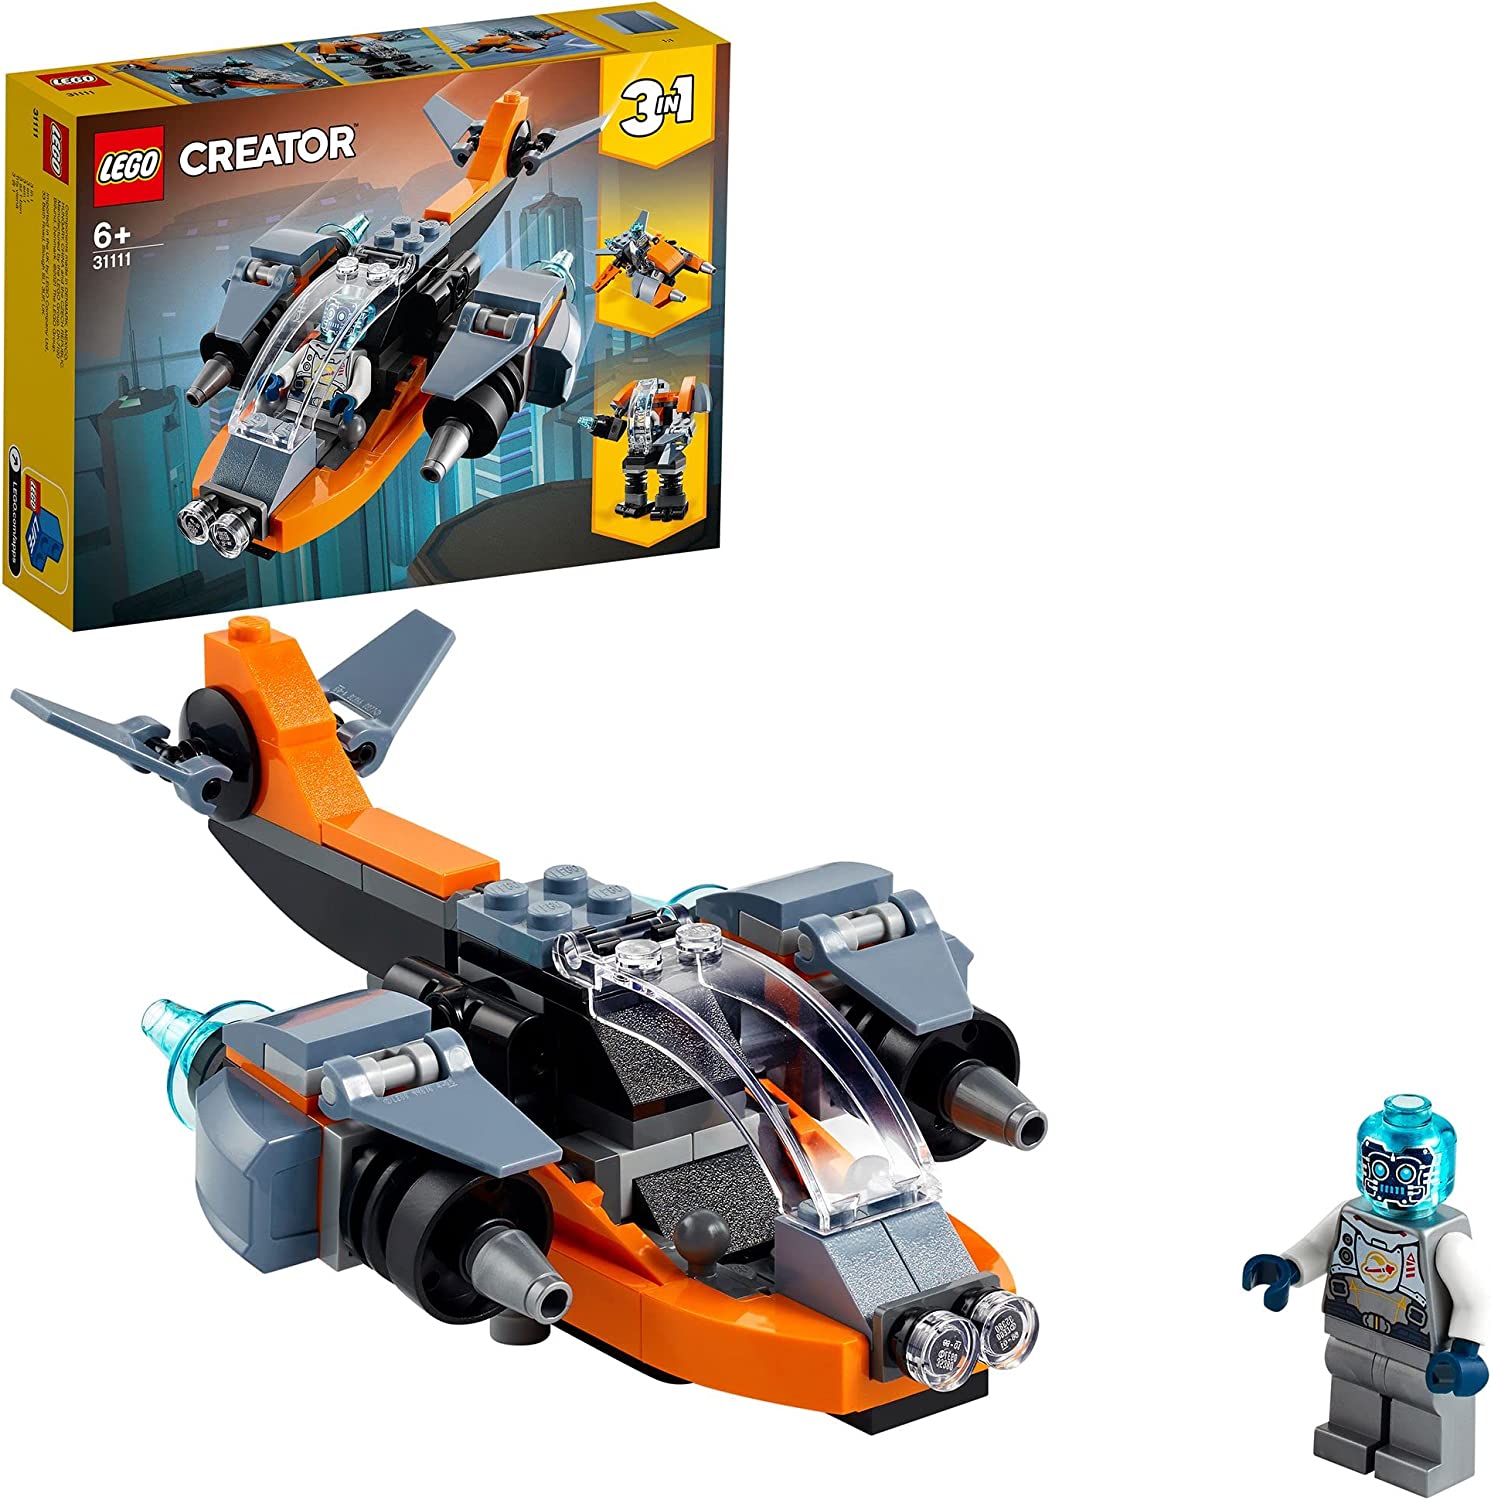 LEGO Creator 31111 3-in-1 Cyber Drone Construction Kit with Cyber Mech and Scooter, Space Toy for Children 6 Years and Up